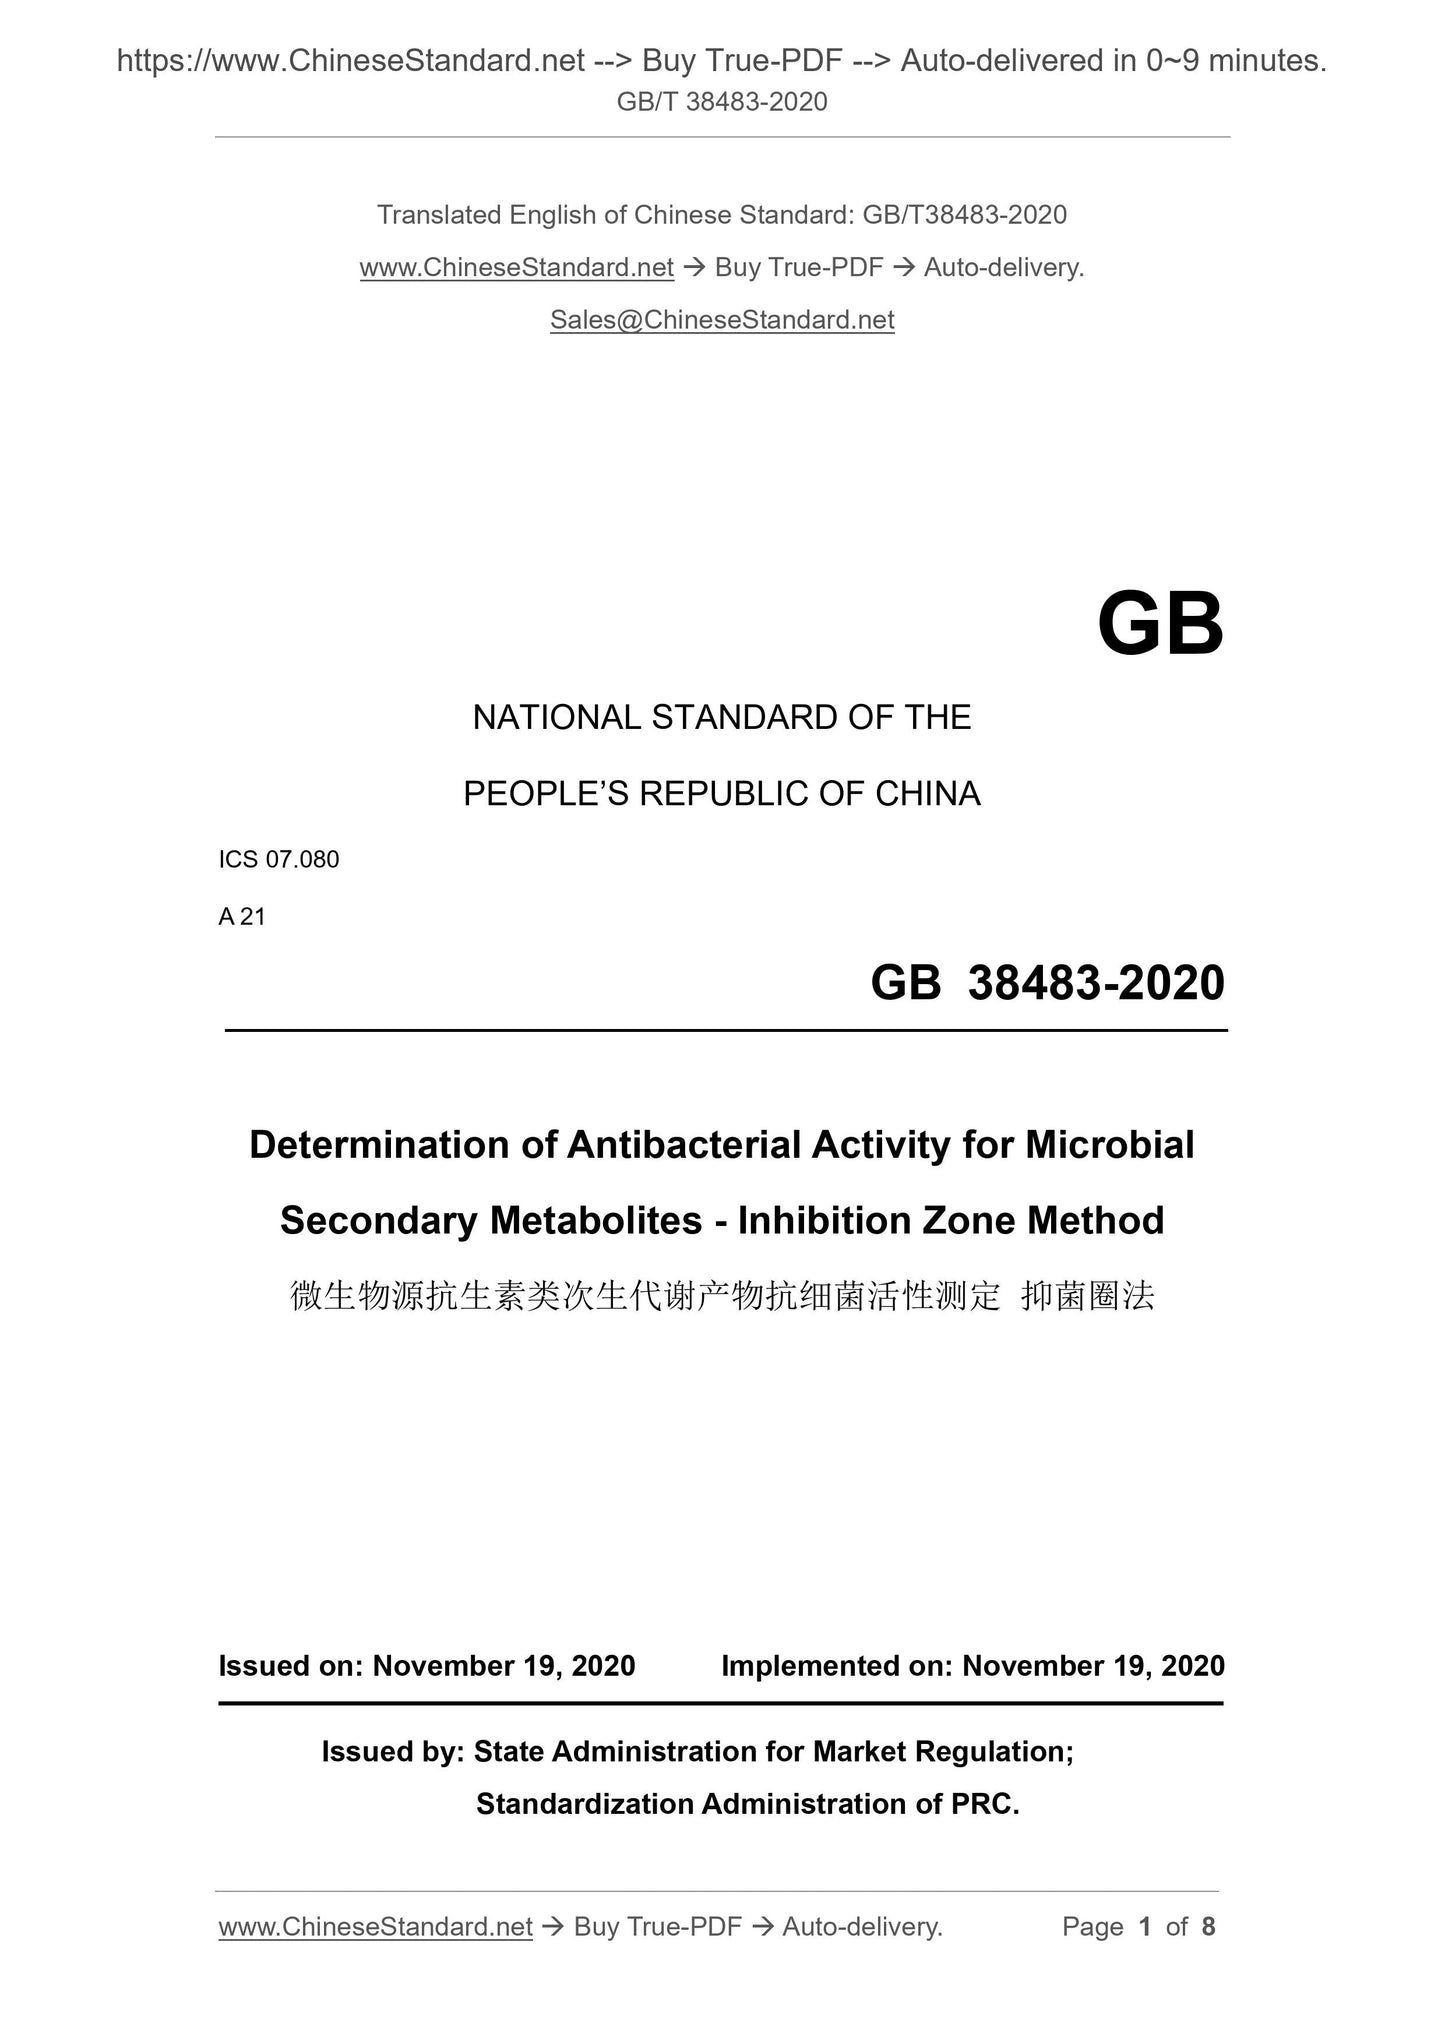 GB/T 38483-2020 Page 1